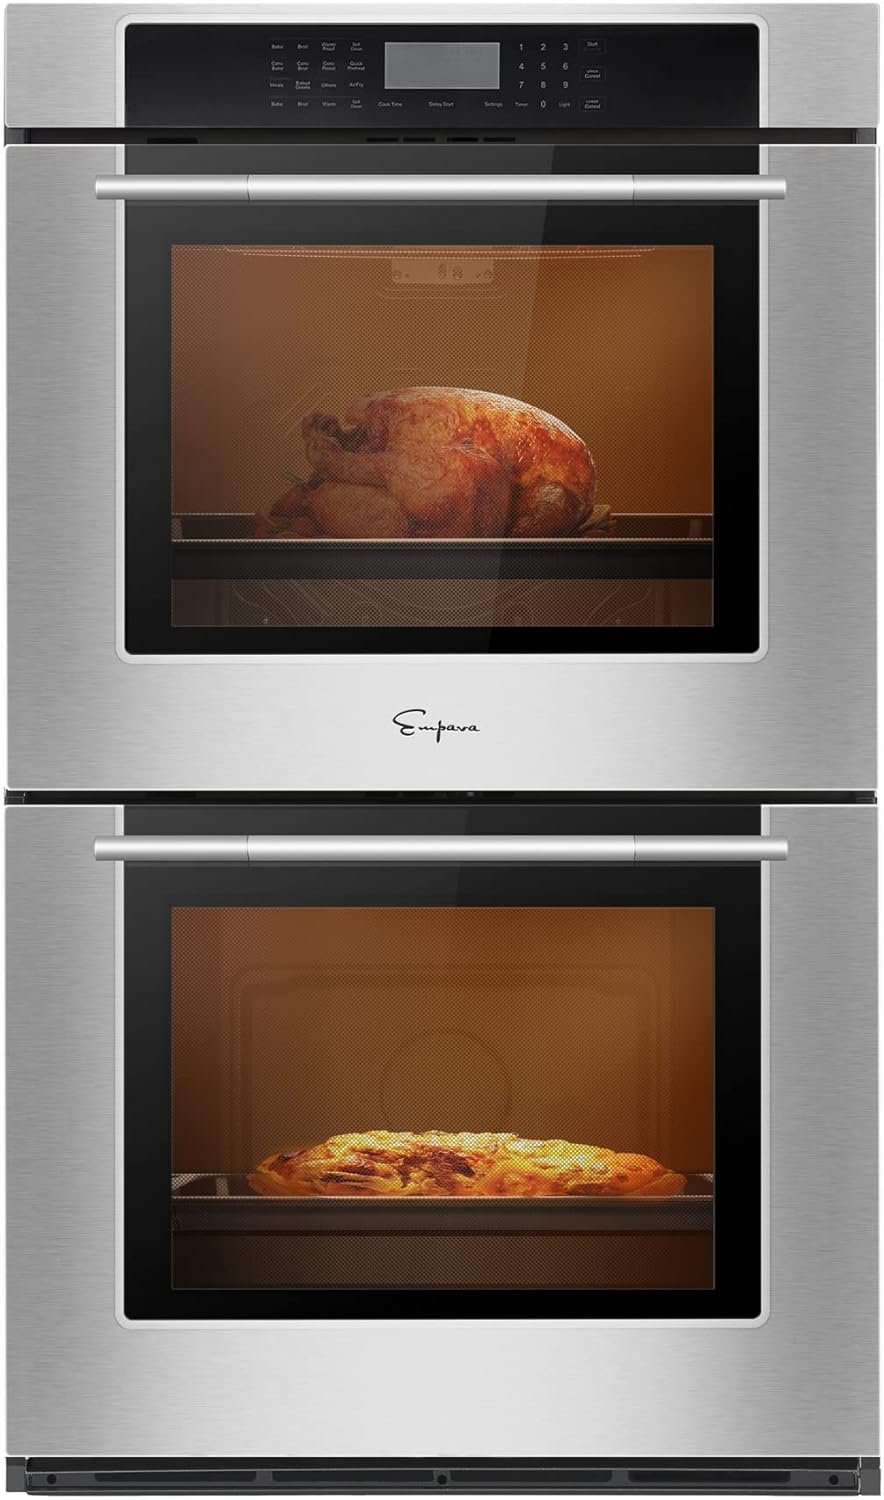 Empava 30 Electric Double Wall Oven Air Fryer Combo Convection Oven Built-in 10 Cooking Functions with LED Digital Display Convection Fan Touch Control in Stainless Steel EMPV-30WO05